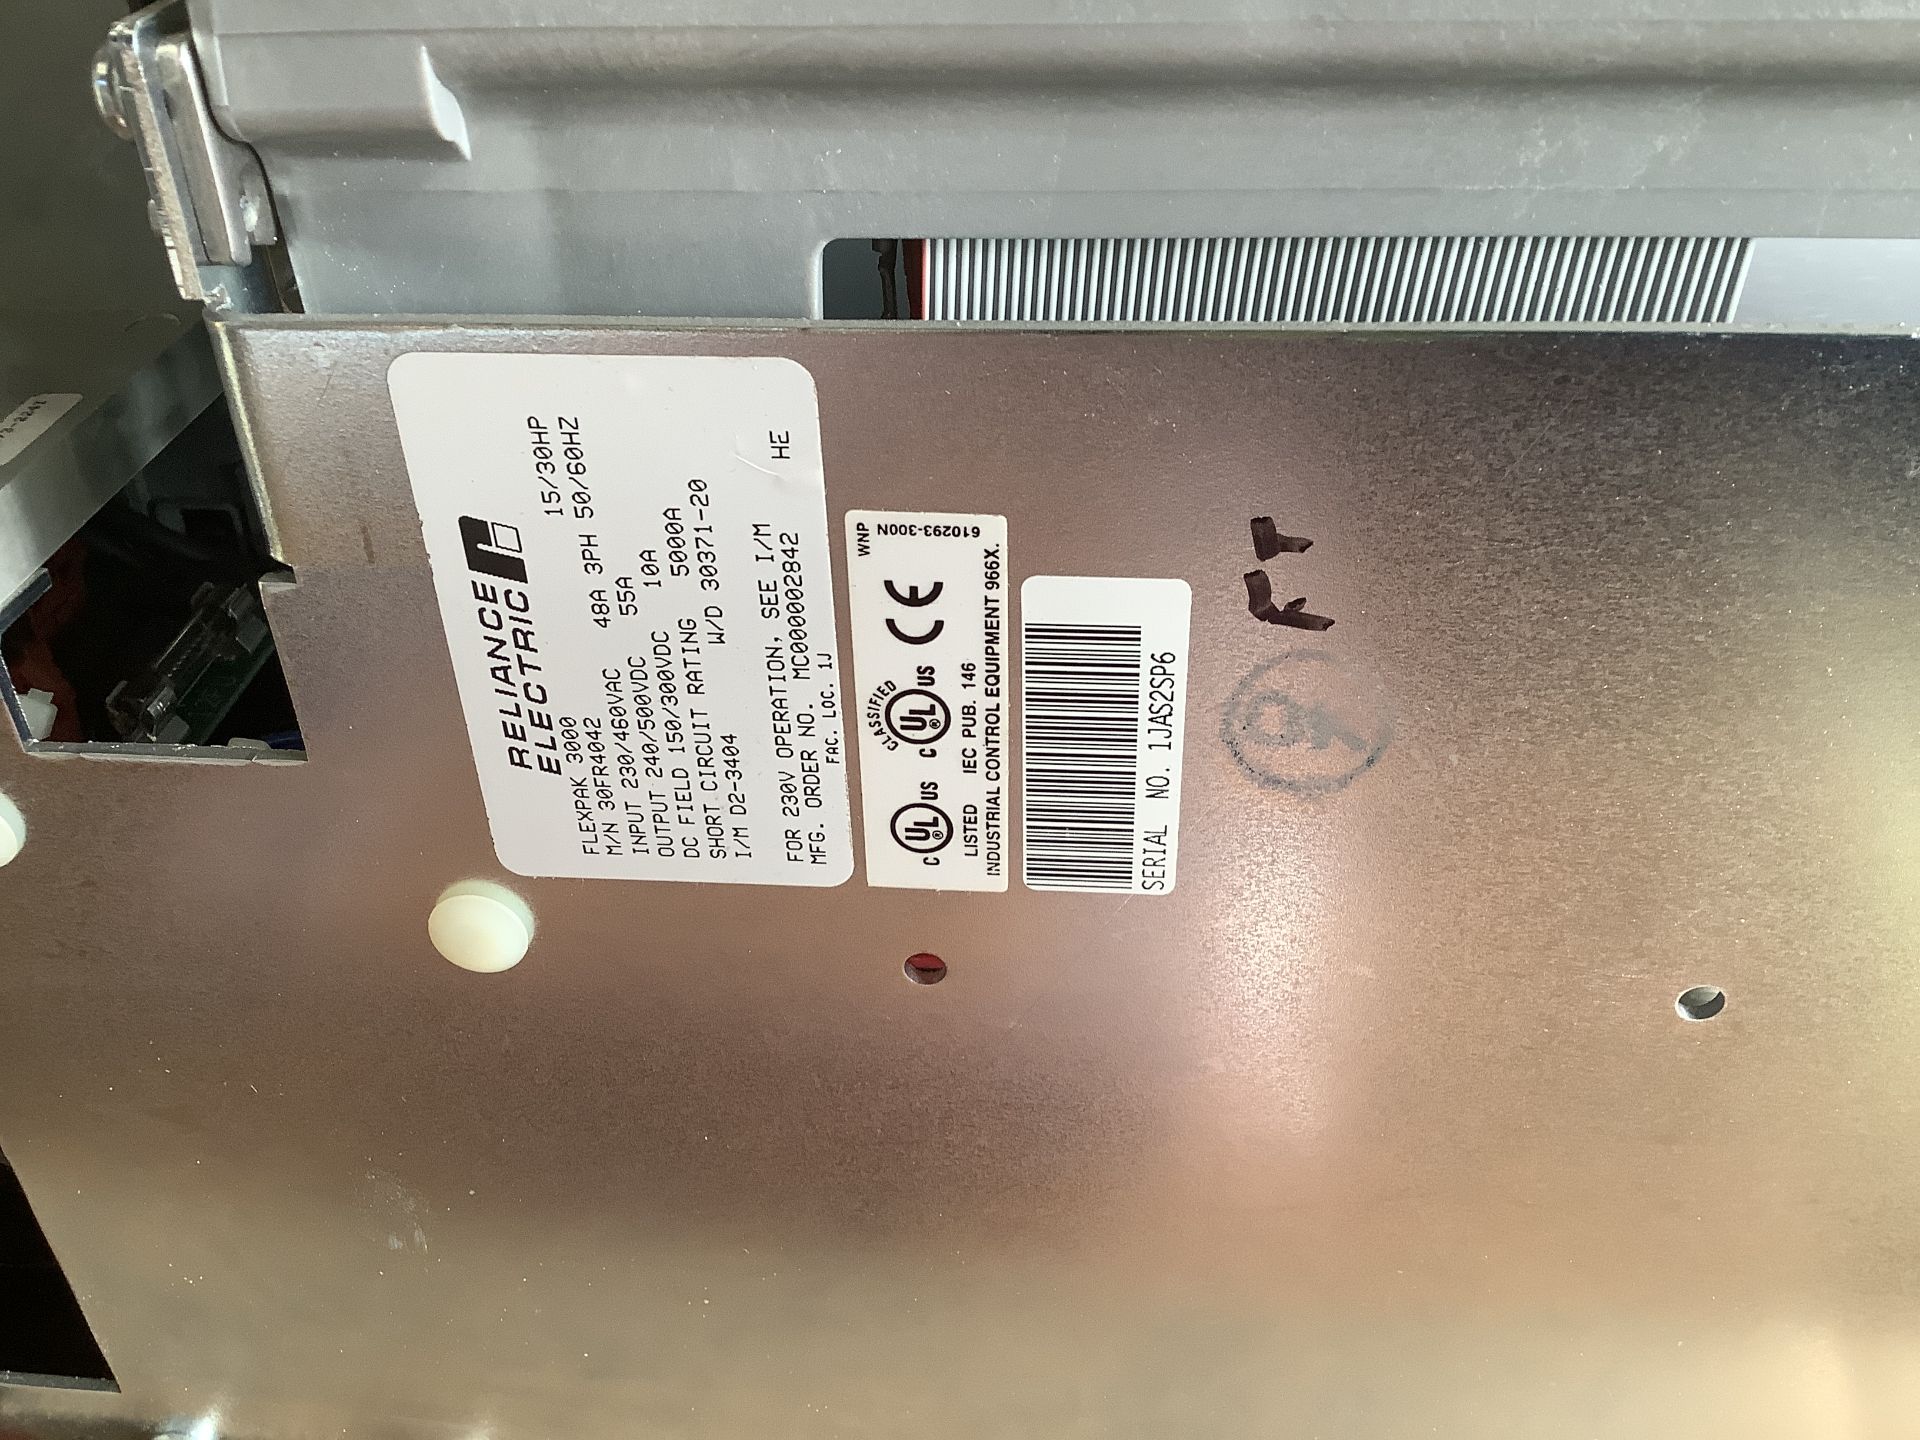 Reliance Electric Flexpak 3000 DC variable speed drive. New, never installed. 230 / 460 volt. - Image 4 of 9